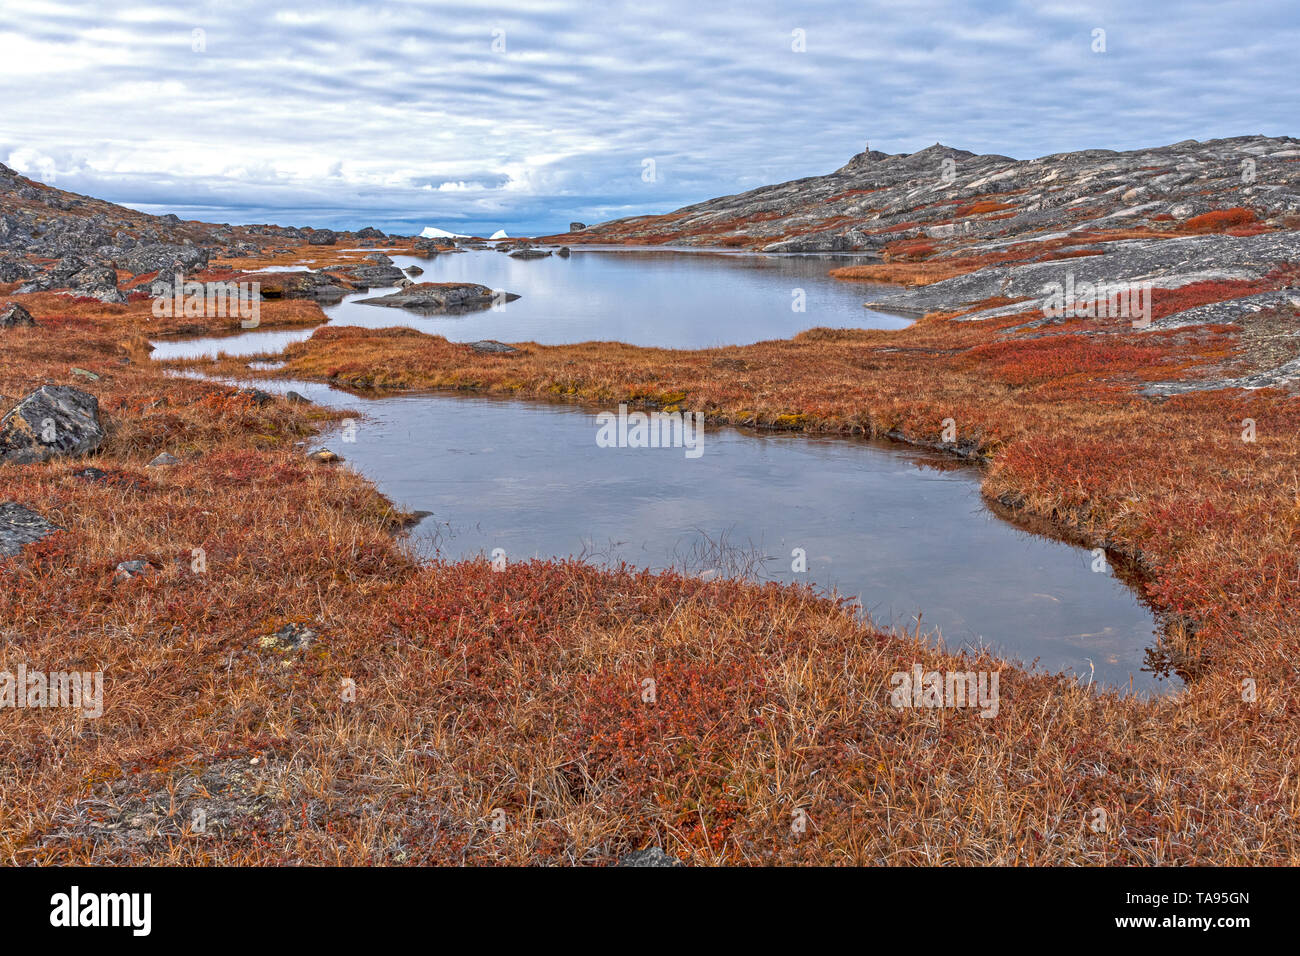 Tundra Ponds in the High Arctic near the Icefjord of Ilulissat, Greenland Stock Photo